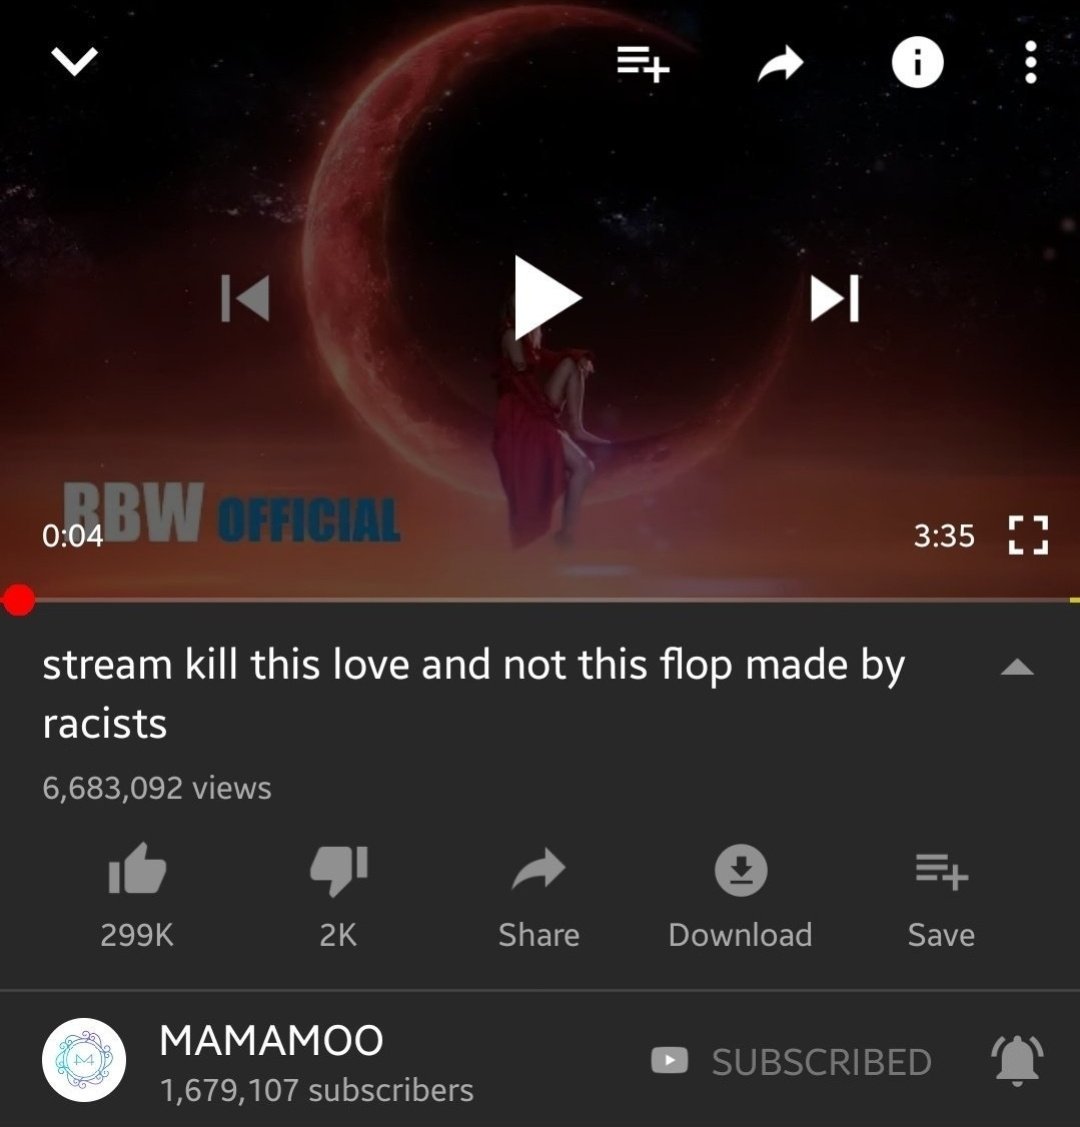 Ant*s hacked Mamamoo's Youtube account and changed their MV titles and descriptions into hateful, triggering things.